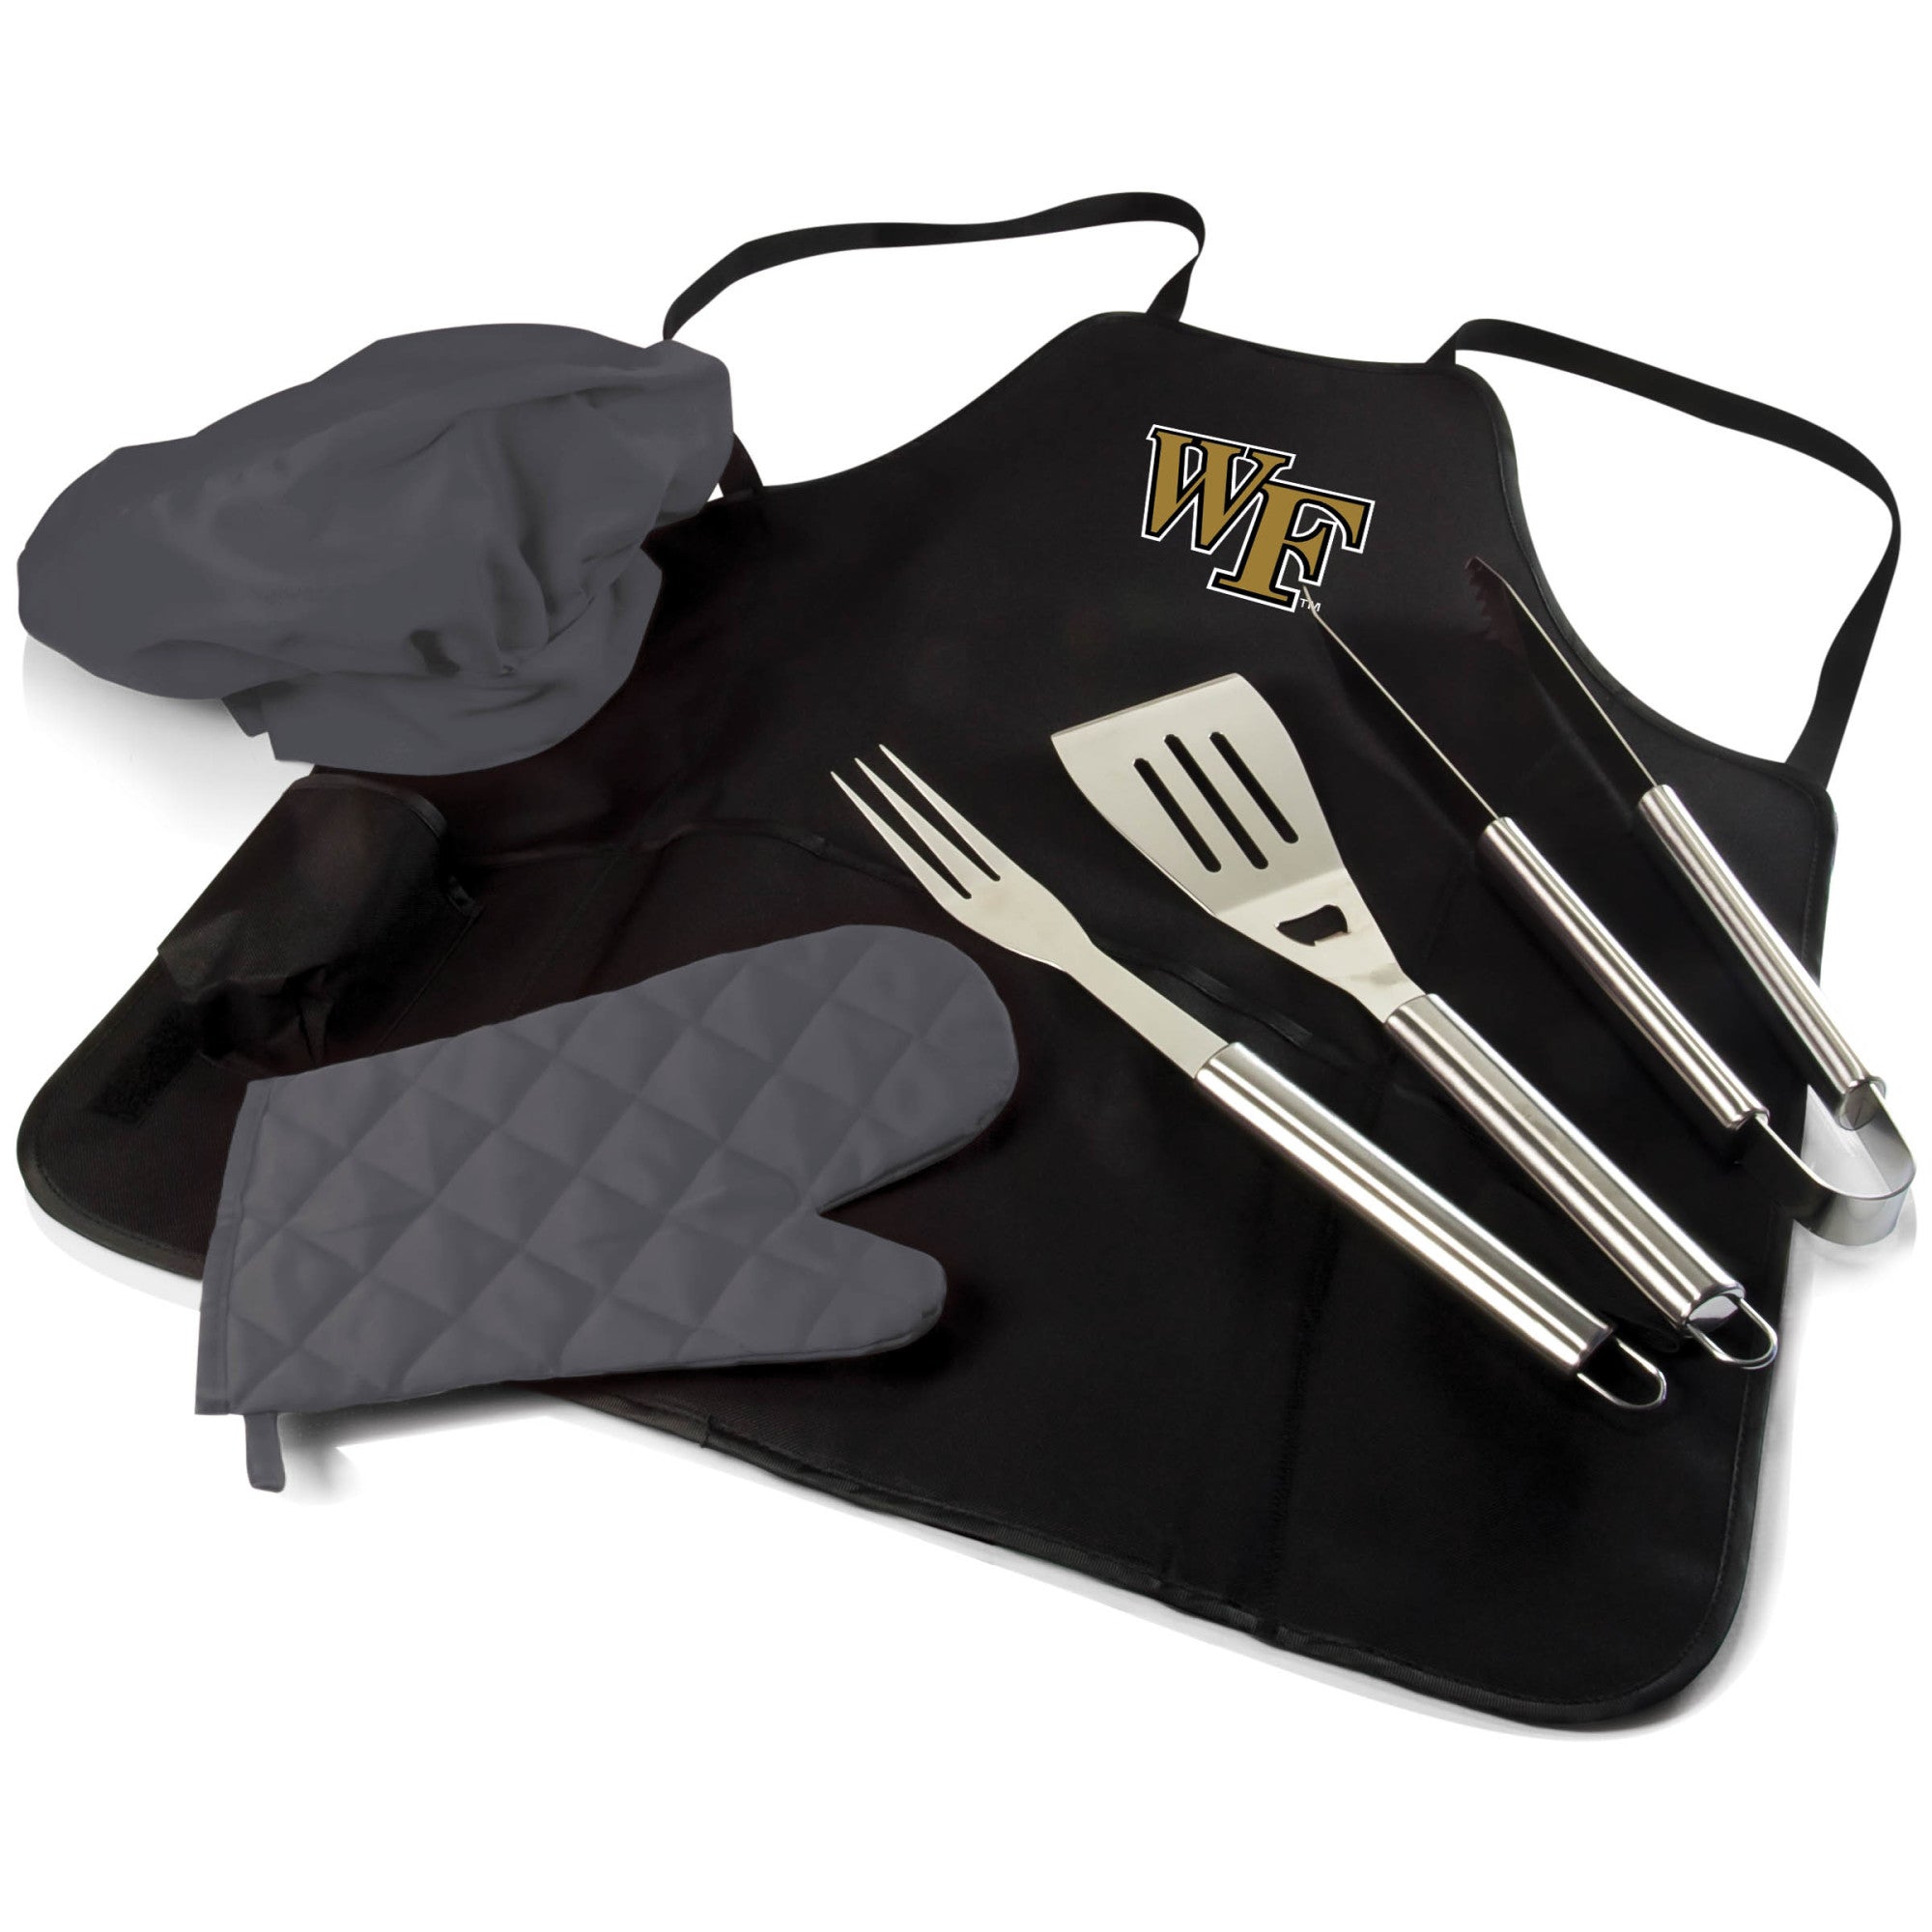 Wake Forest Demon Deacons - BBQ Apron Tote Pro Grill Set, (Black with Gray Accents)